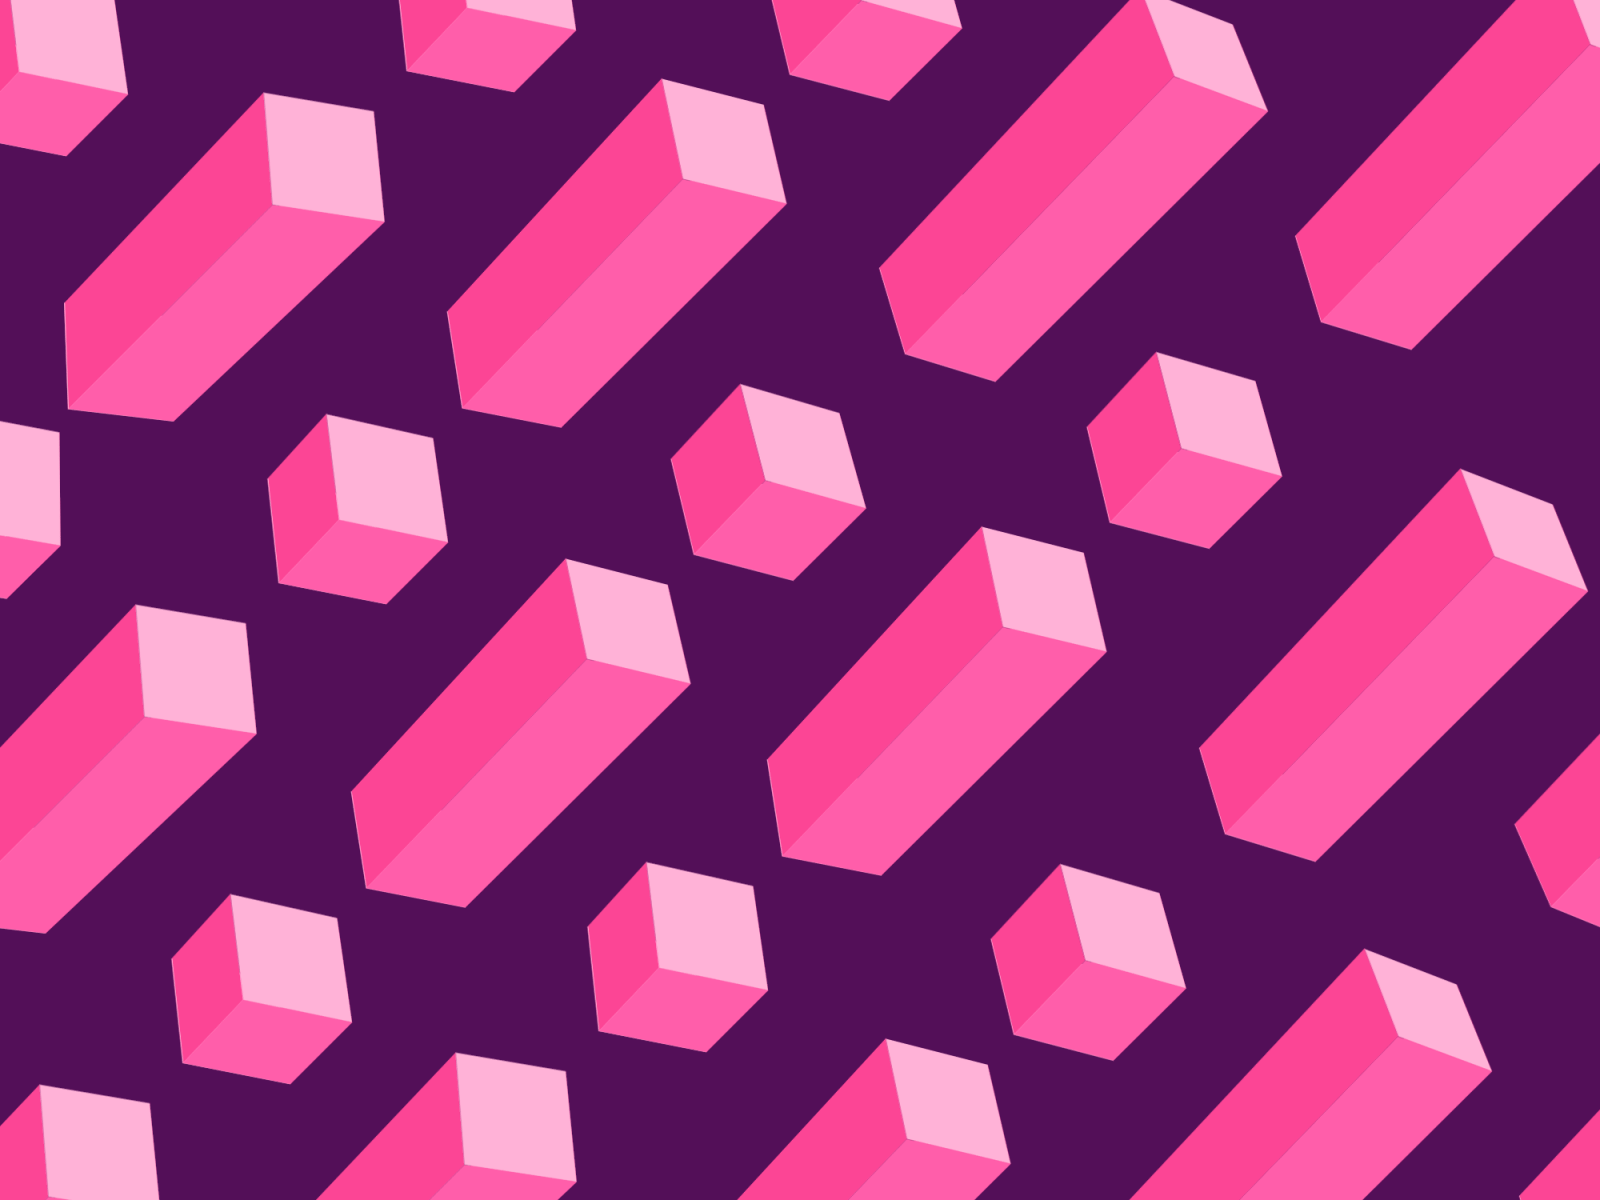 Pattern animation by Adrian Campagnolle on Dribbble